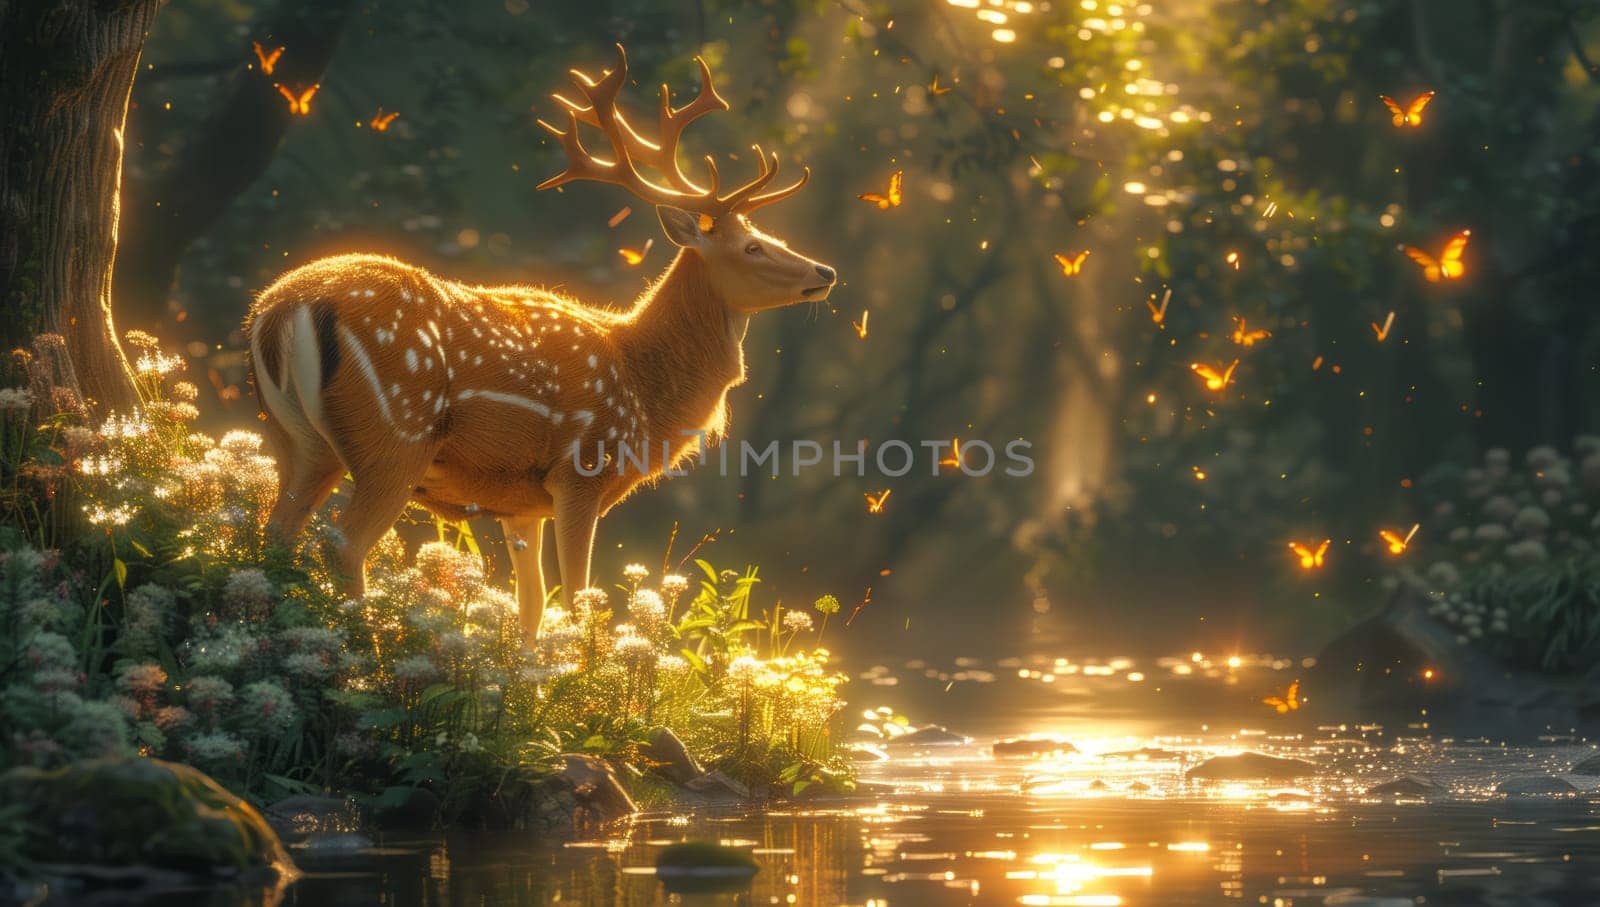 A deer, terrestrial animal, stands beside the river in the natural landscape of the woods. Its fawn grazes on the grassy bank, while its tail flicks and snout sniffs the air